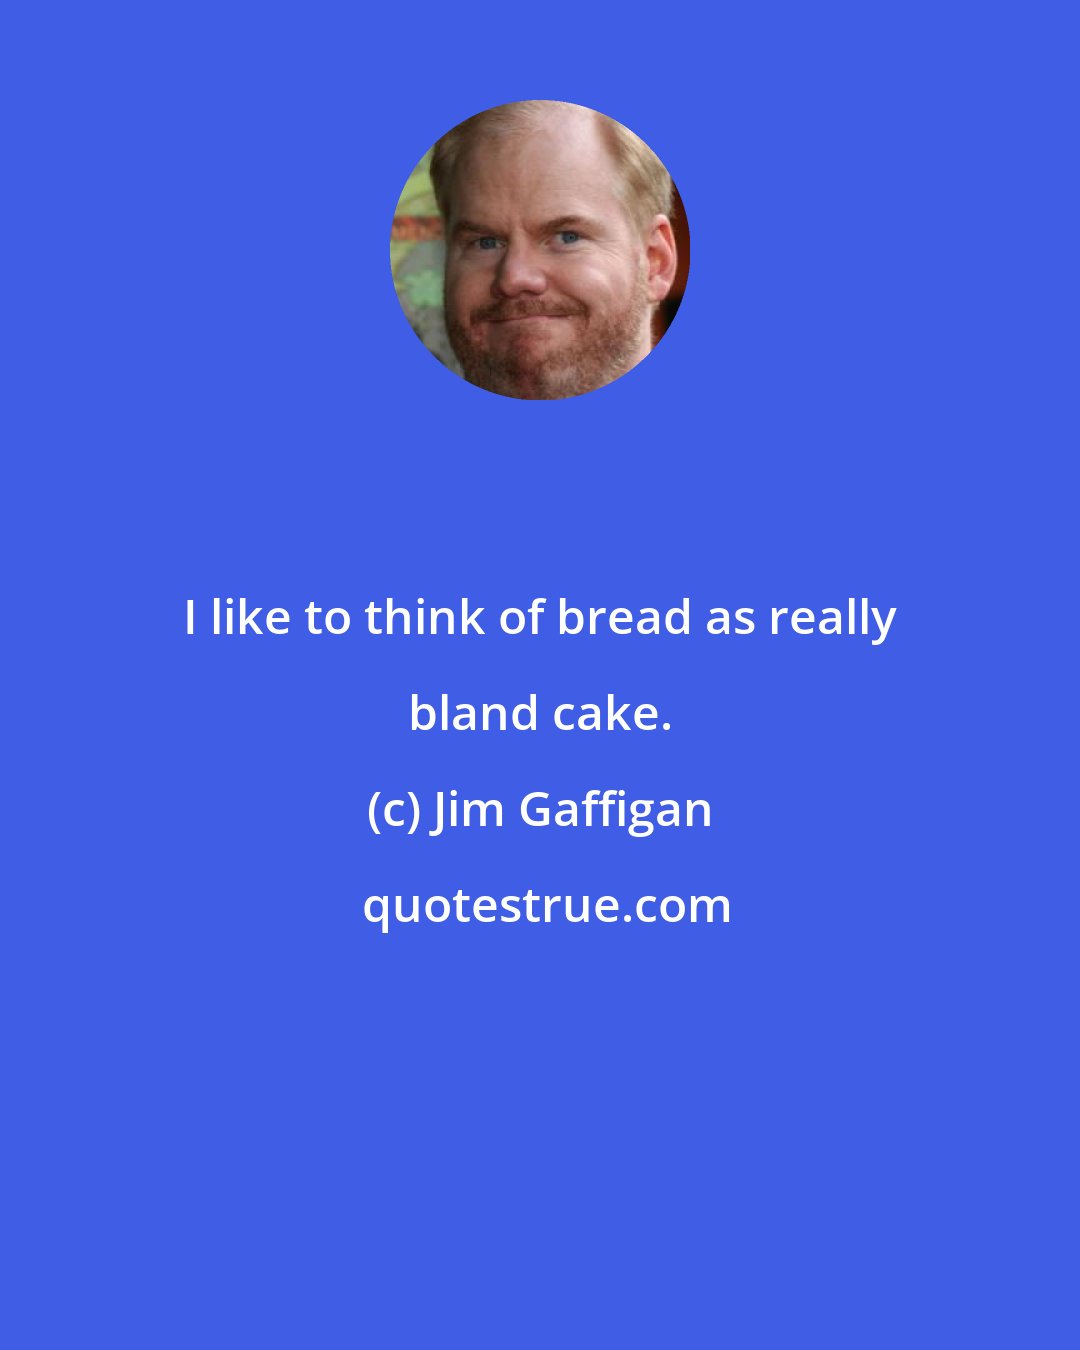 Jim Gaffigan: I like to think of bread as really bland cake.